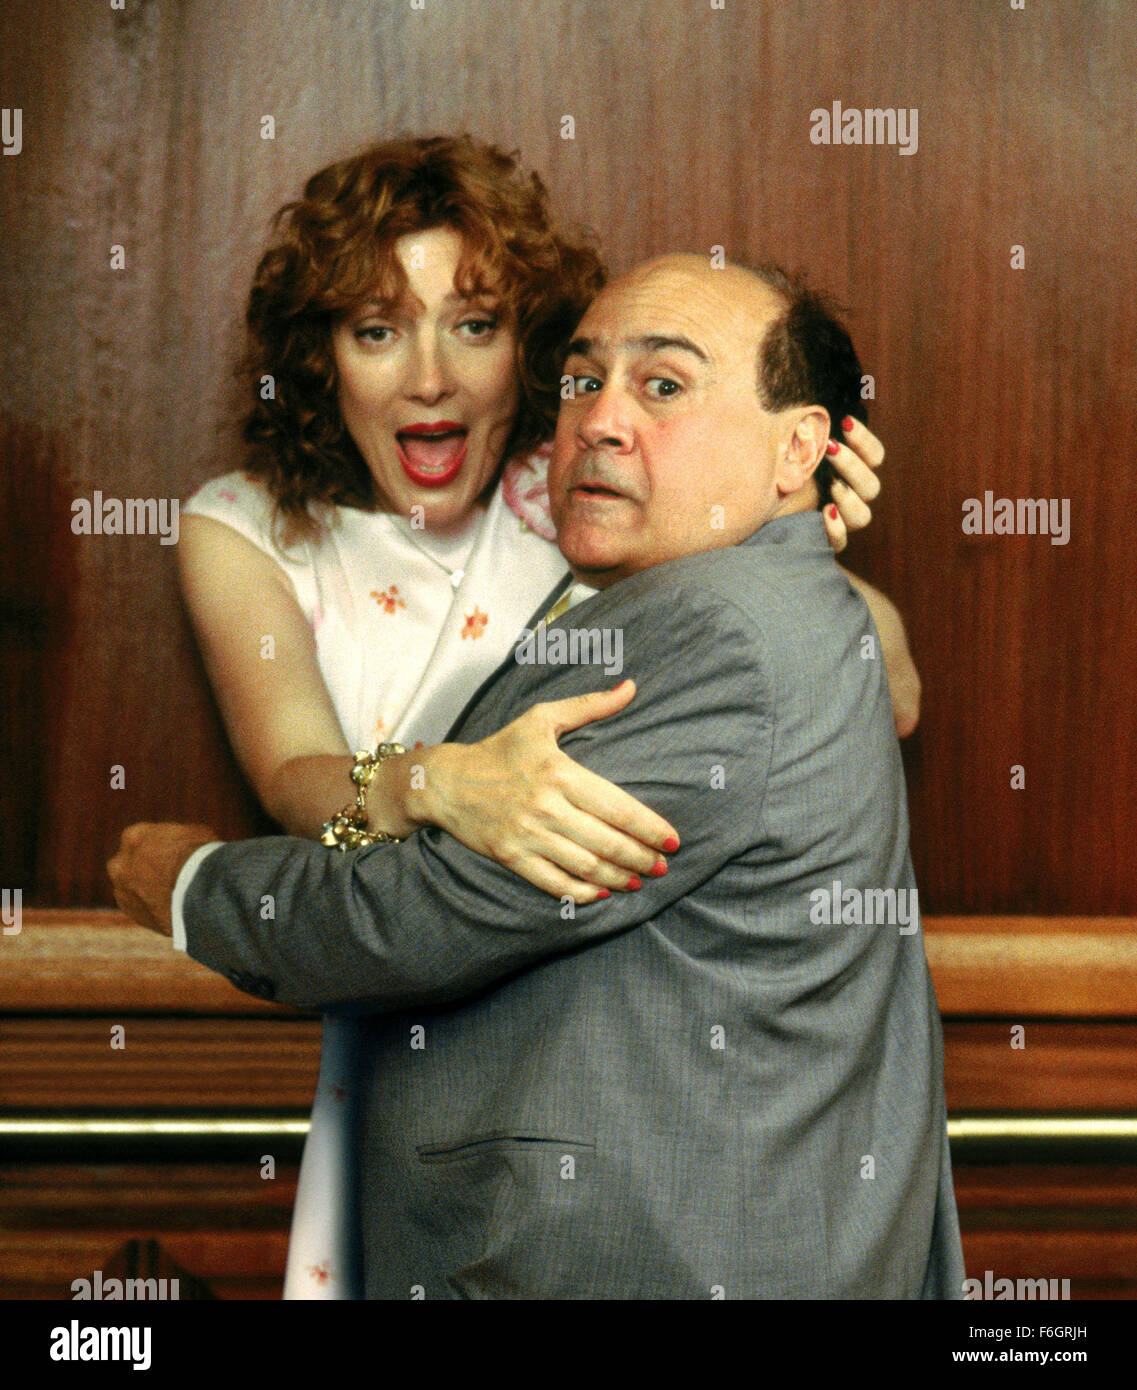 Jun 01, 2001; Boston , MA, USA; Actors GLENNE HEADLY as Gloria and DANNY DEVITO as Max Fairbanks star in  'What's The Worst That Could Happen?' Stock Photo